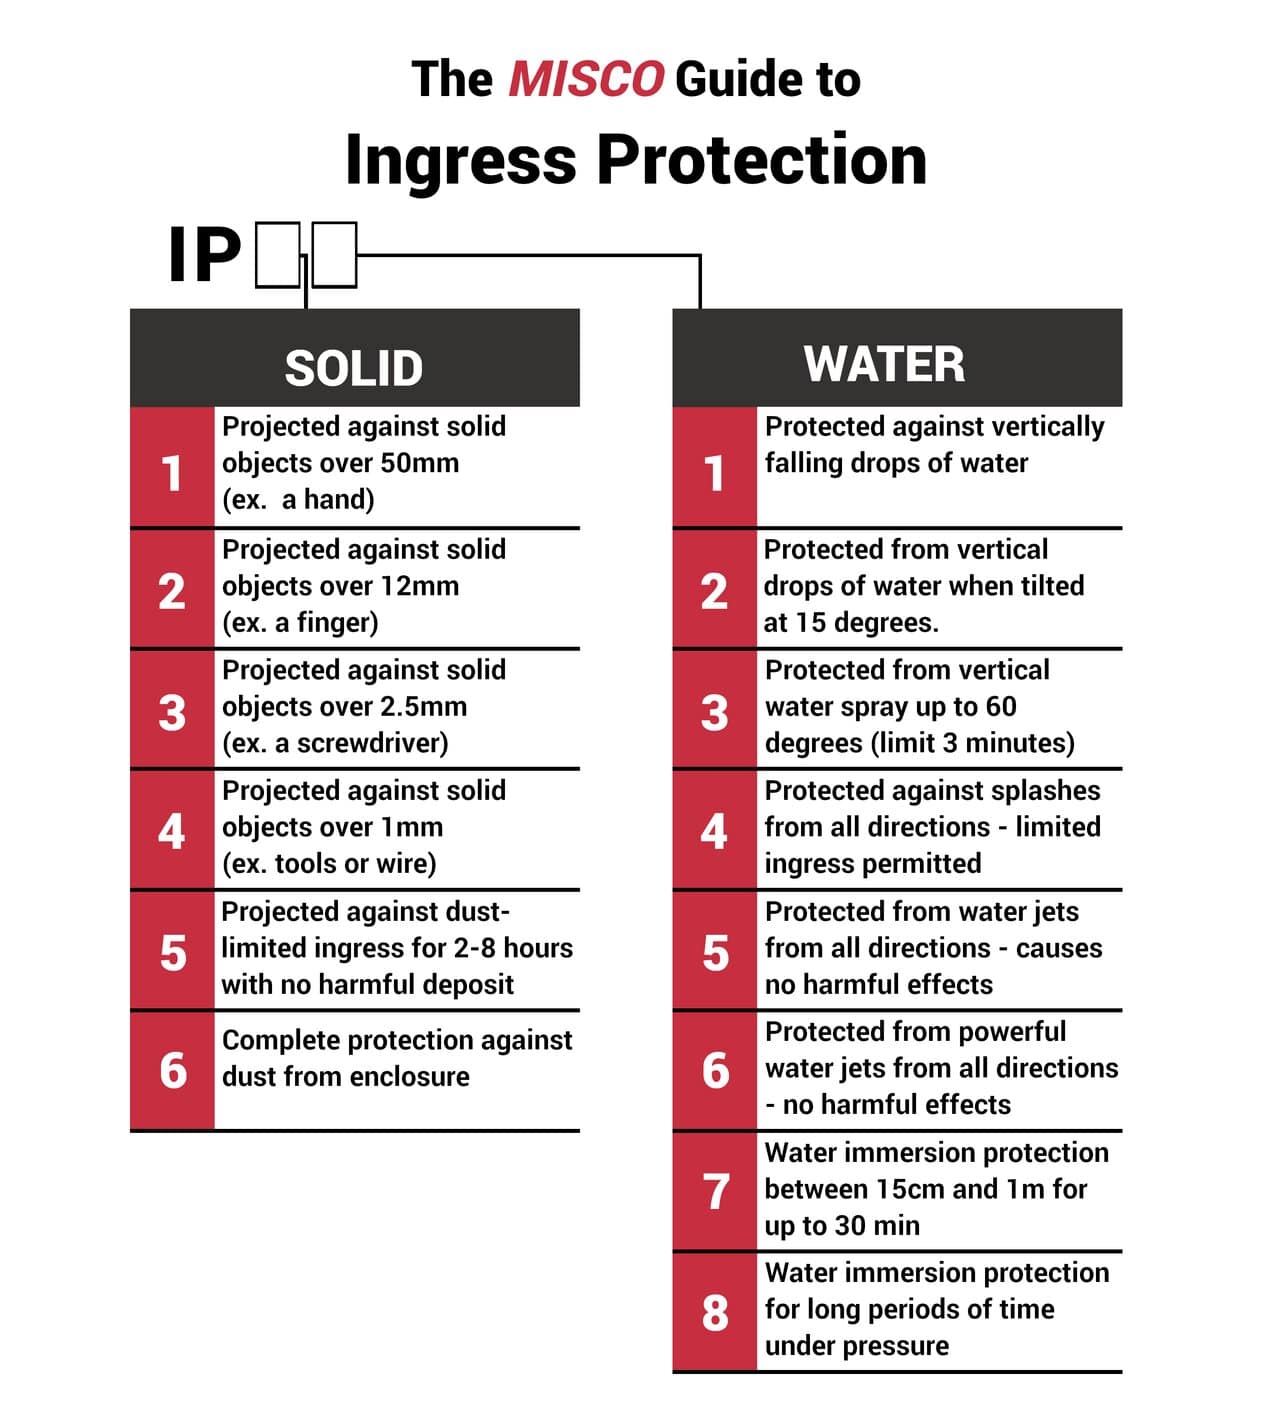 ingress protection guide comparing solids and water